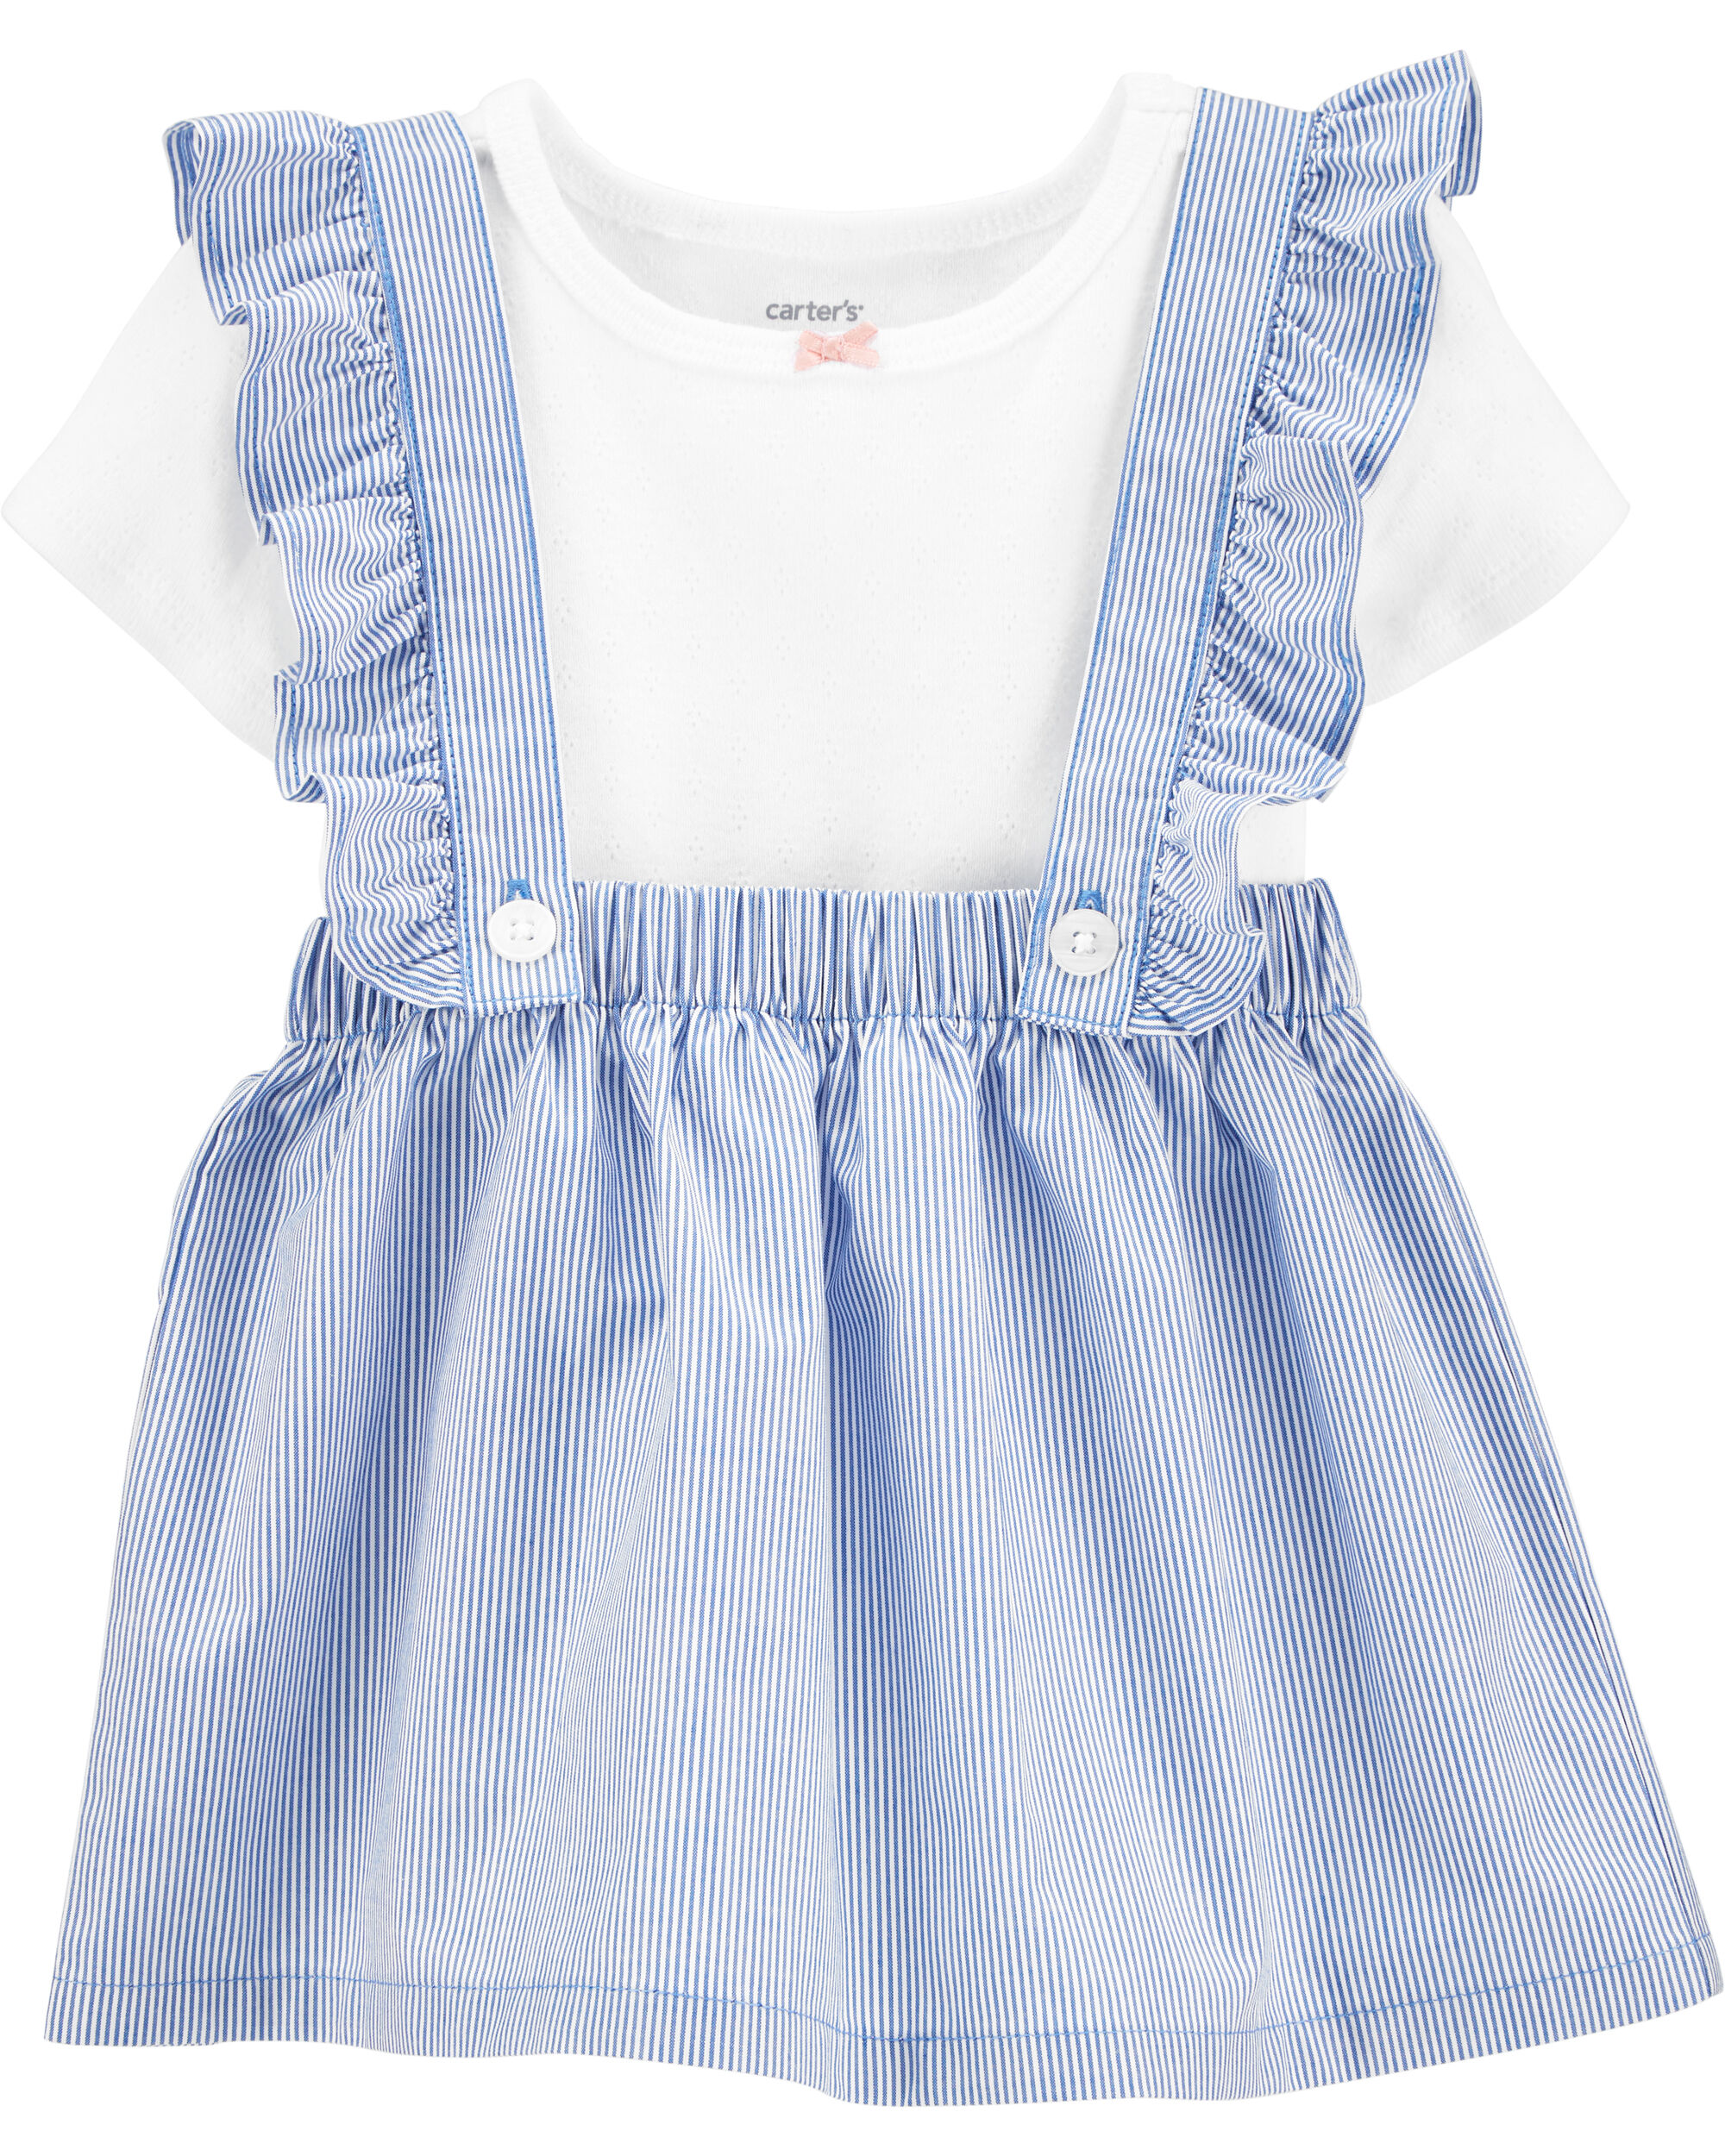 carter's blue and white striped dress